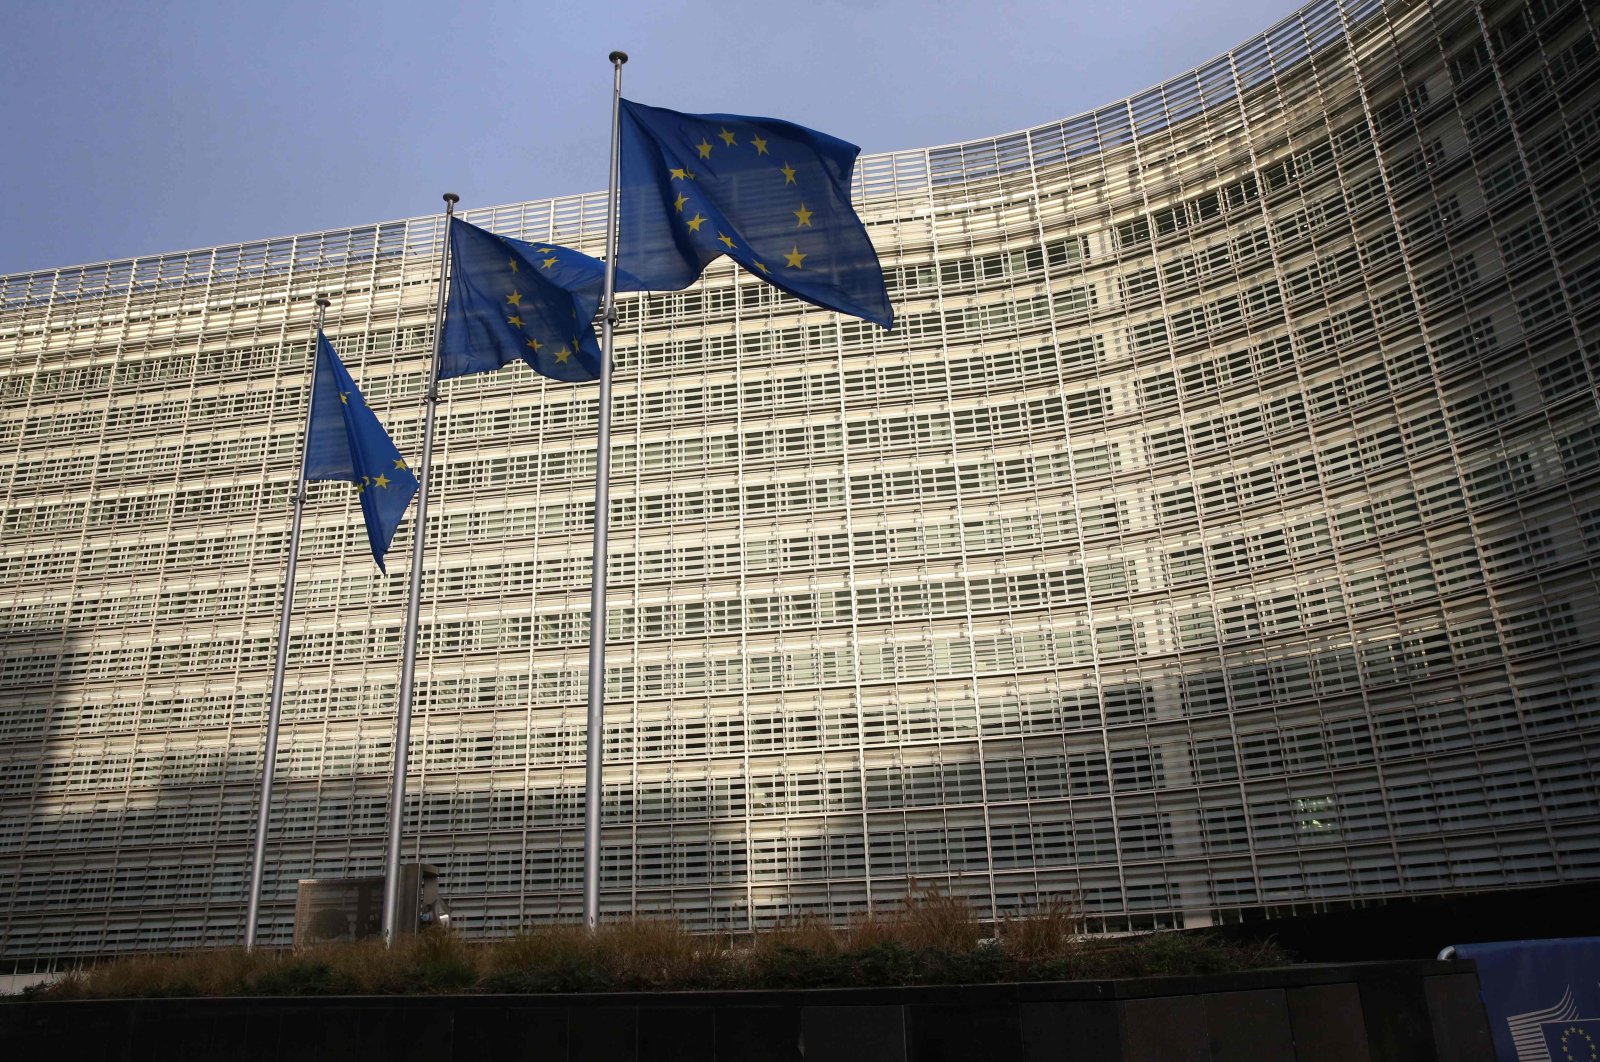 Flags of the European Union can be seen fluttering outside the European commission headquarters in Brussels, Belgium, Dec. 25, 2020. (AFP Photo)